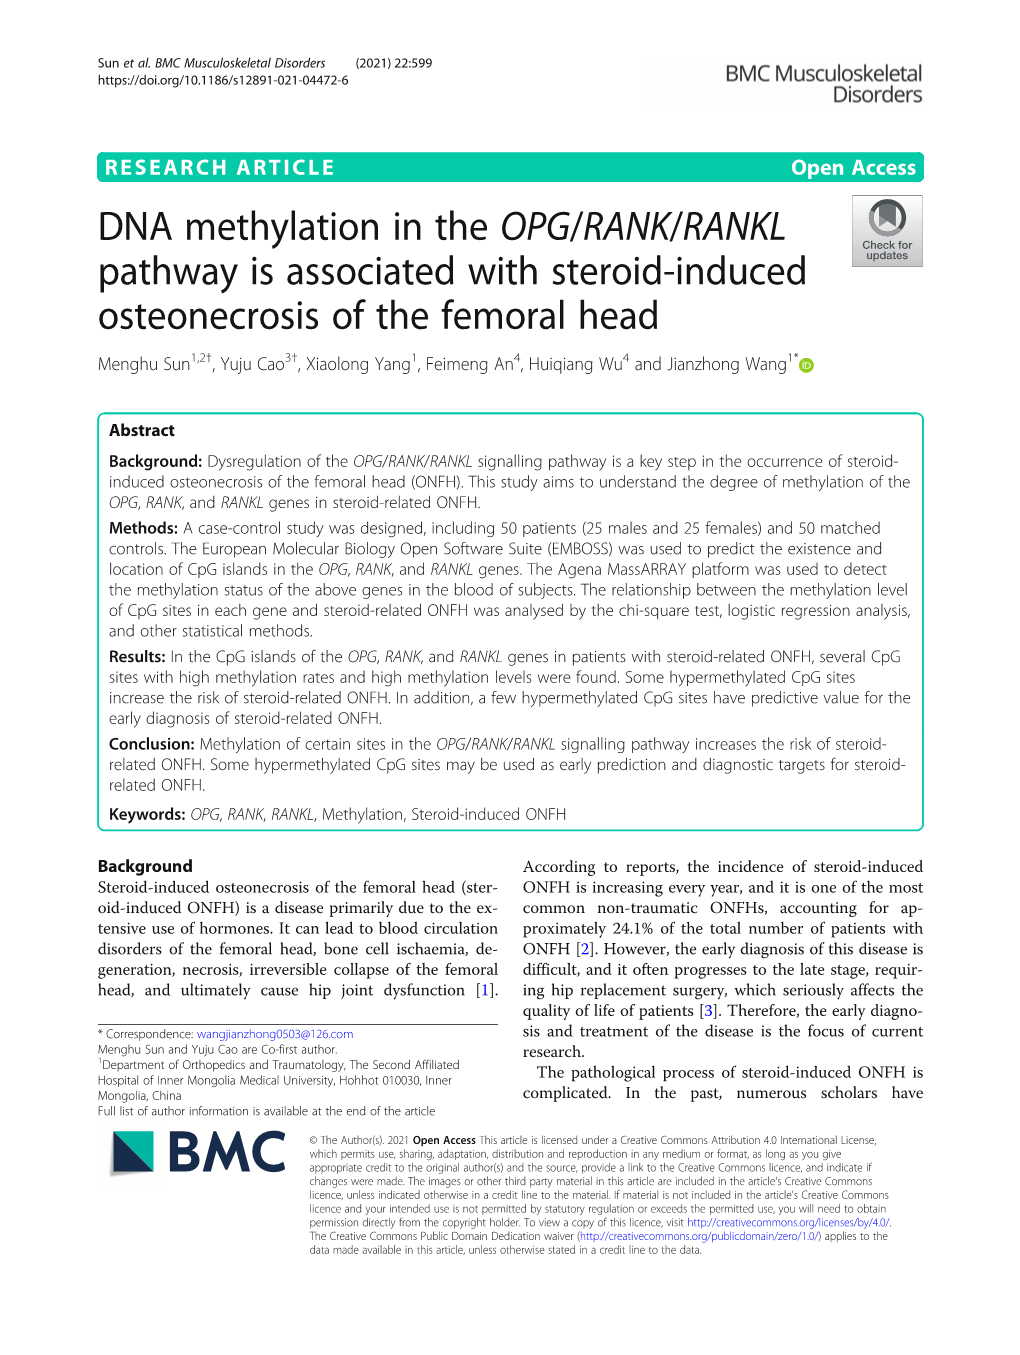 DNA Methylation in the OPG/RANK/RANKL Pathway Is